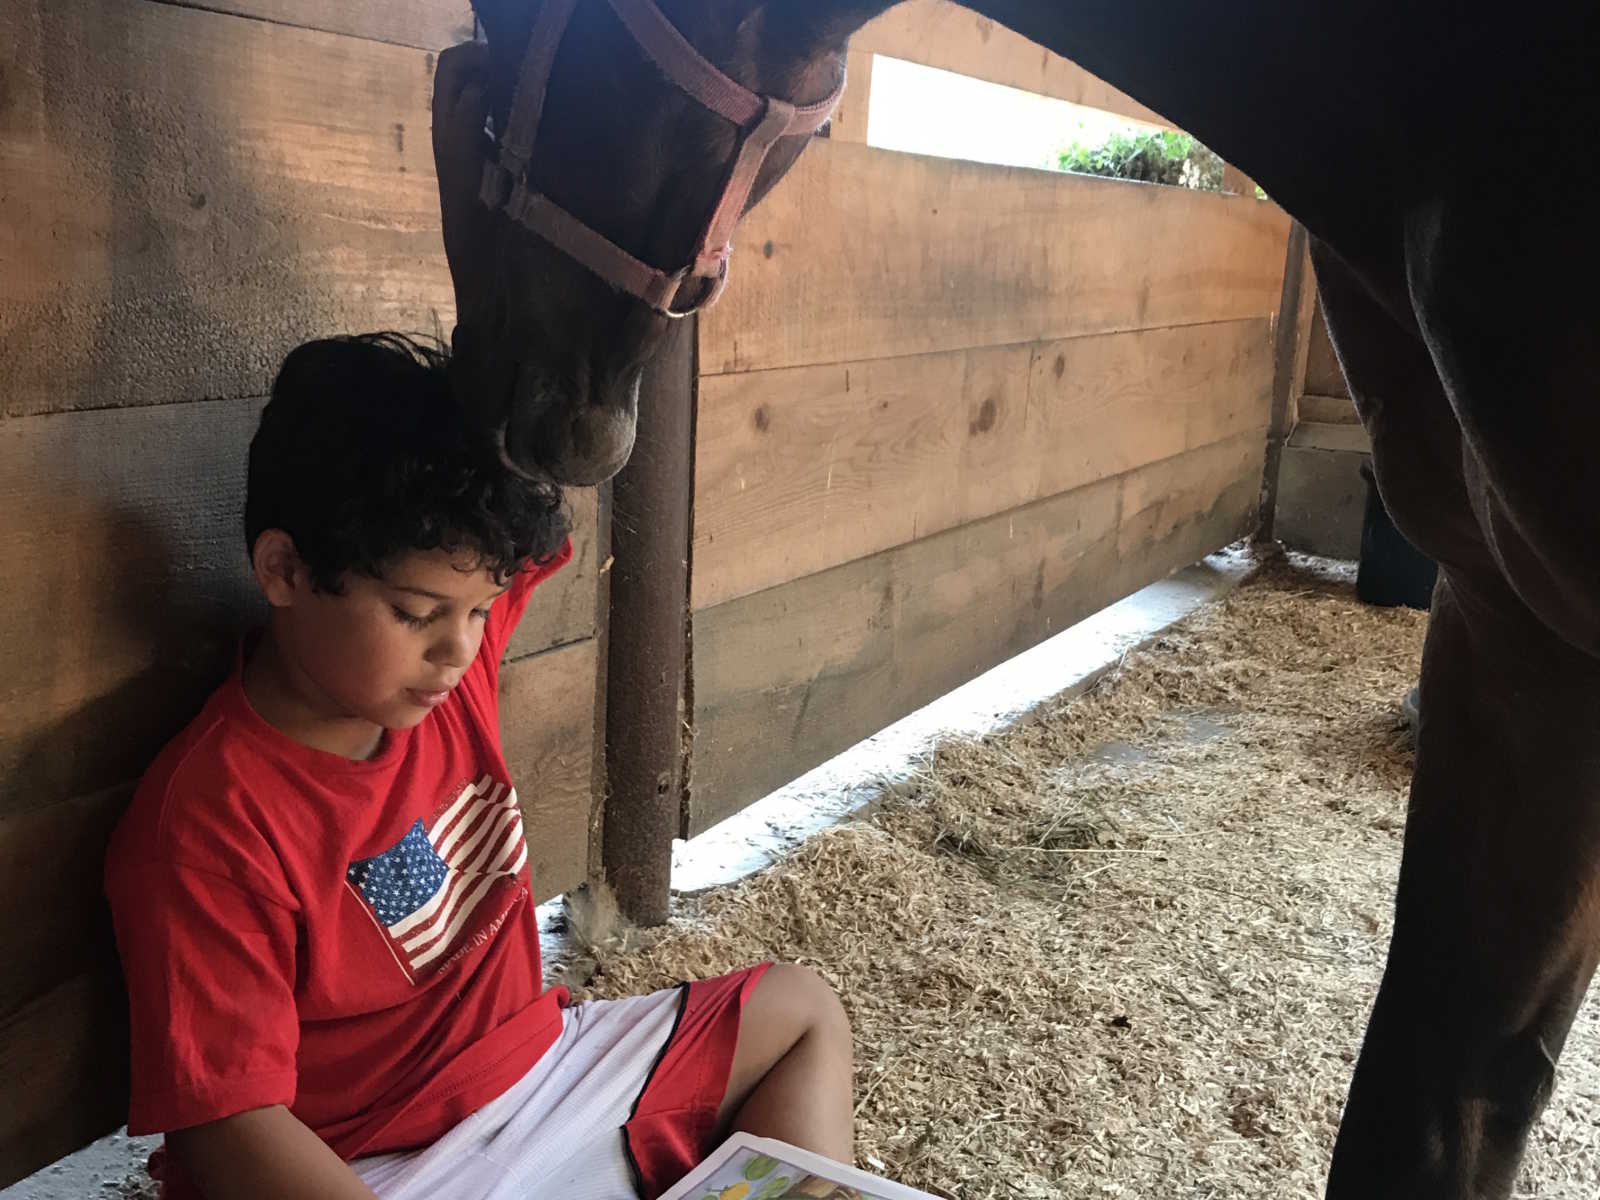 young boy sits on ground of horse stall reading book with arm in the air to pet horses head